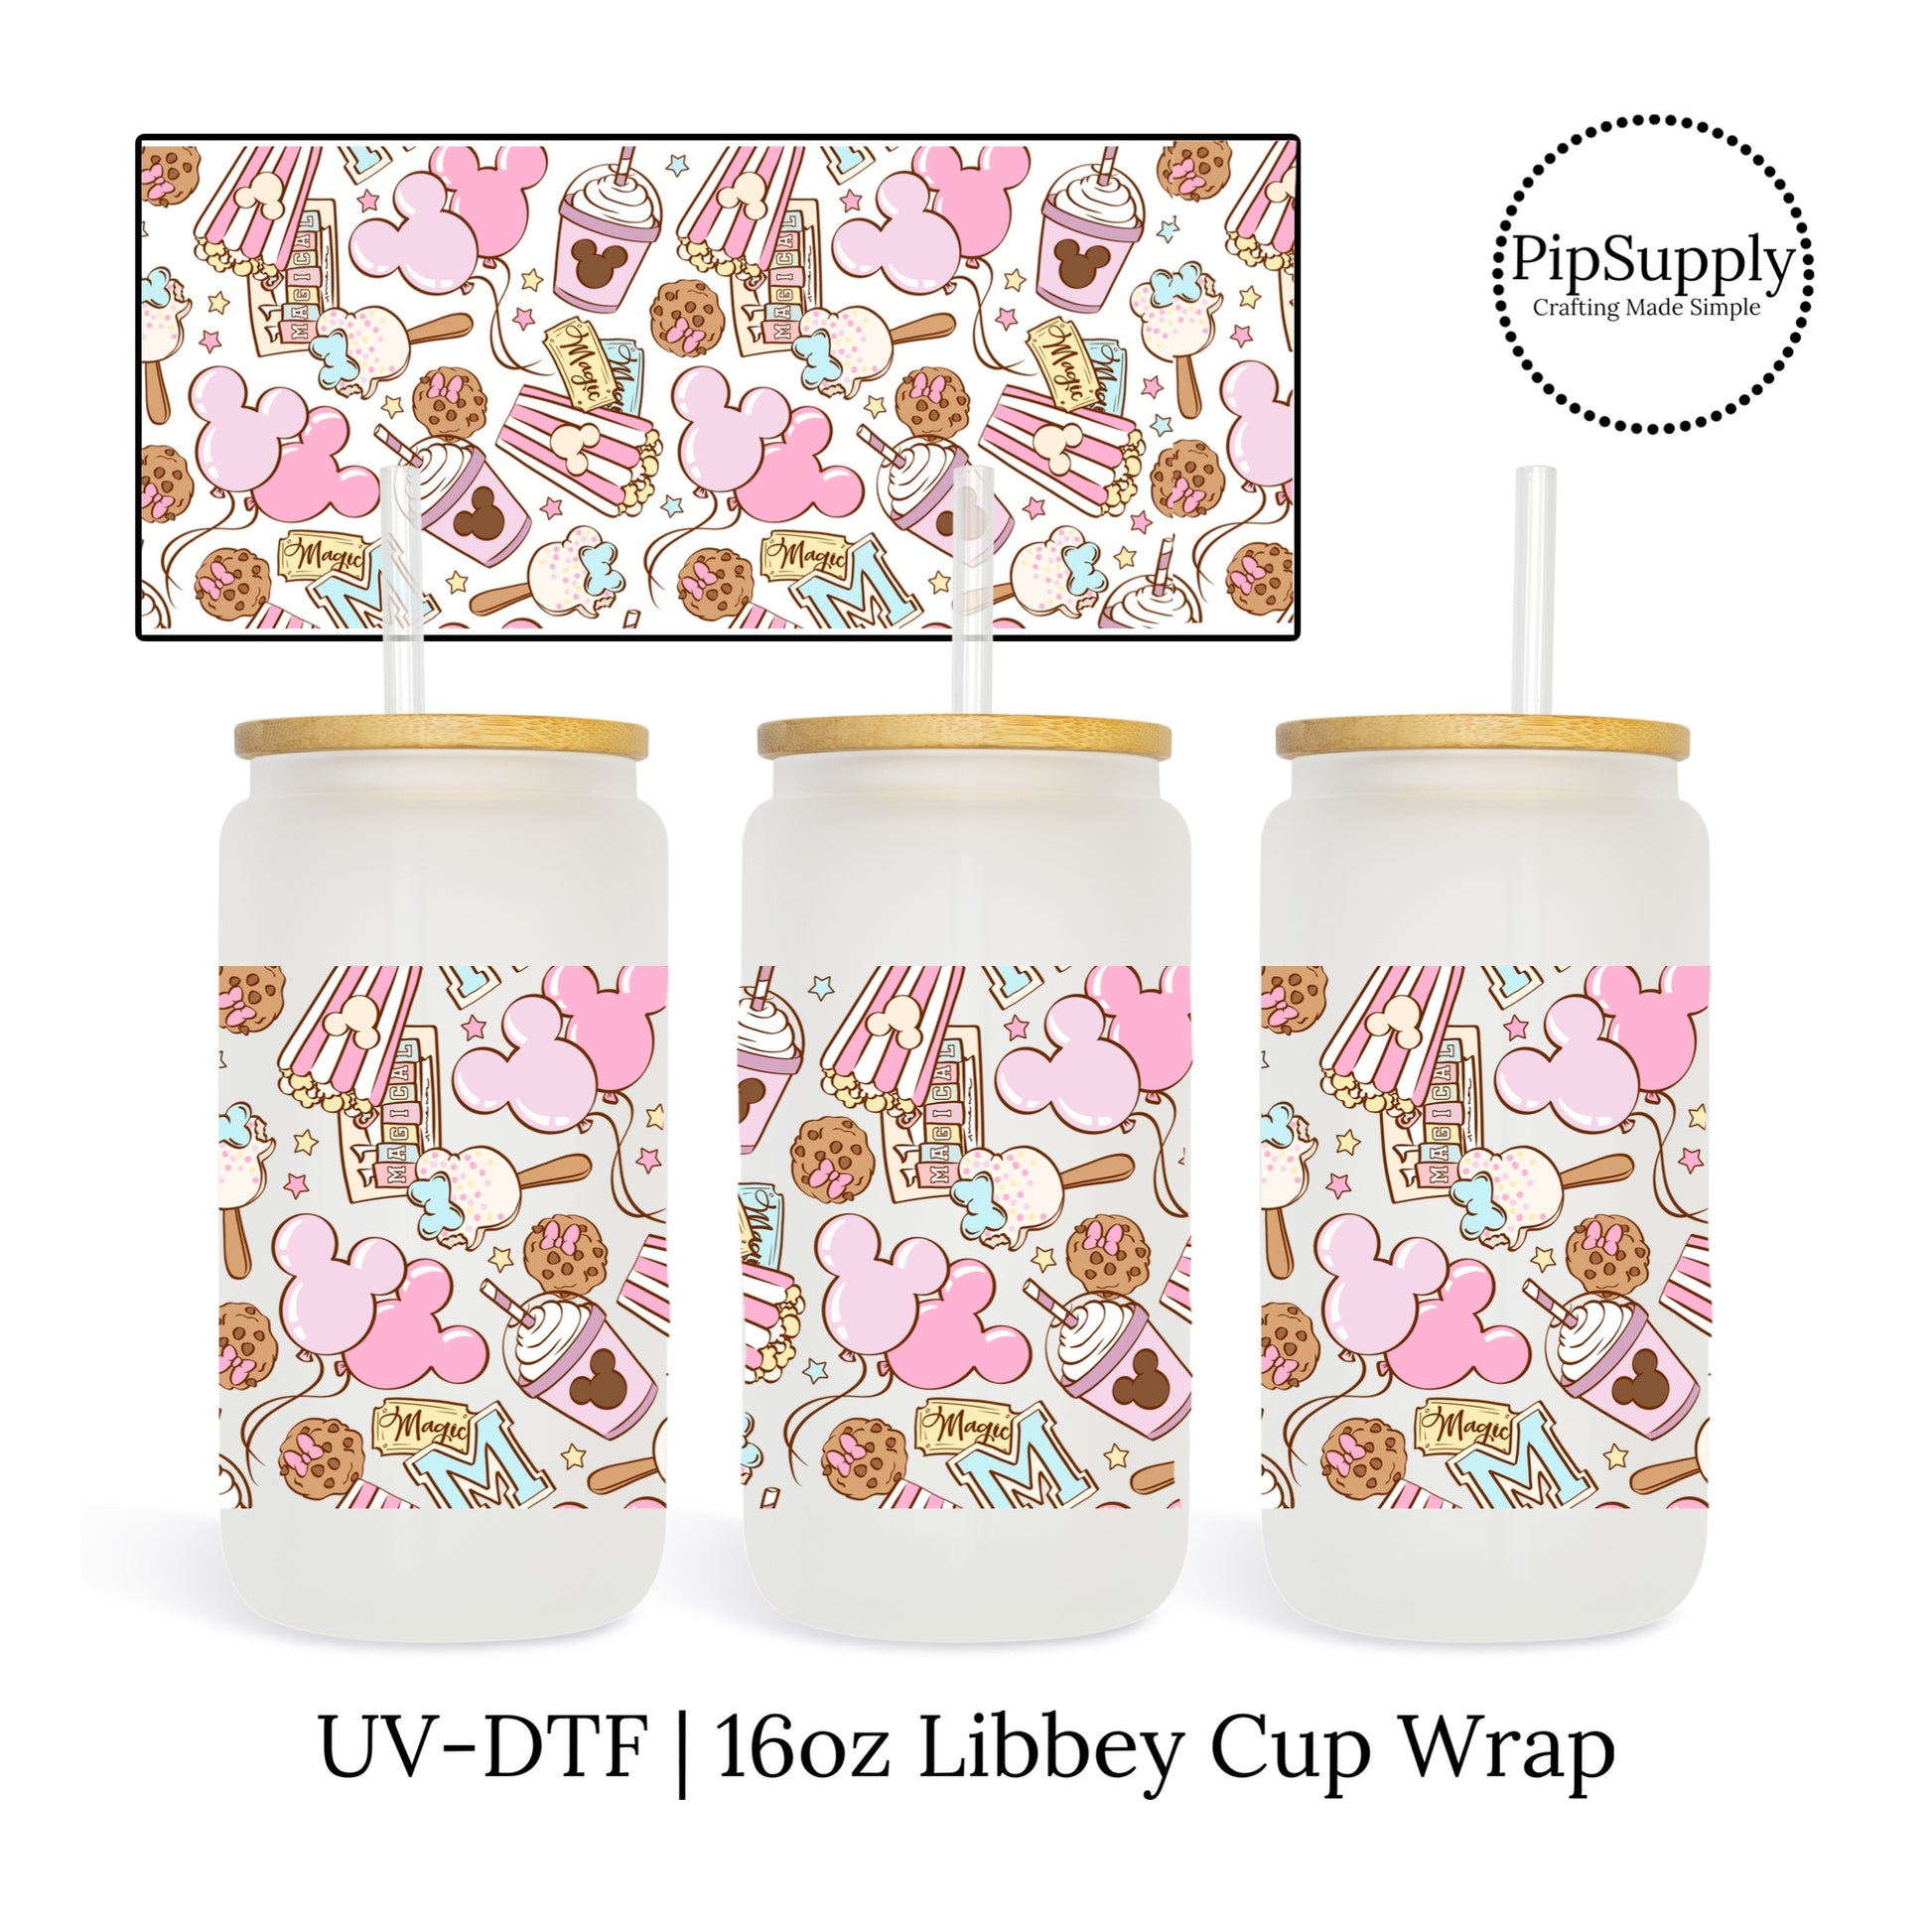  UV DTF Cup Wraps For 16 Oz - 8 Sheets Cowgirl Waterproof Rub  On Transfer Stickes Hot Pink Rub On Transfers For Crafting Glass Western  UVDTF Cup Wrap Wood Crafts